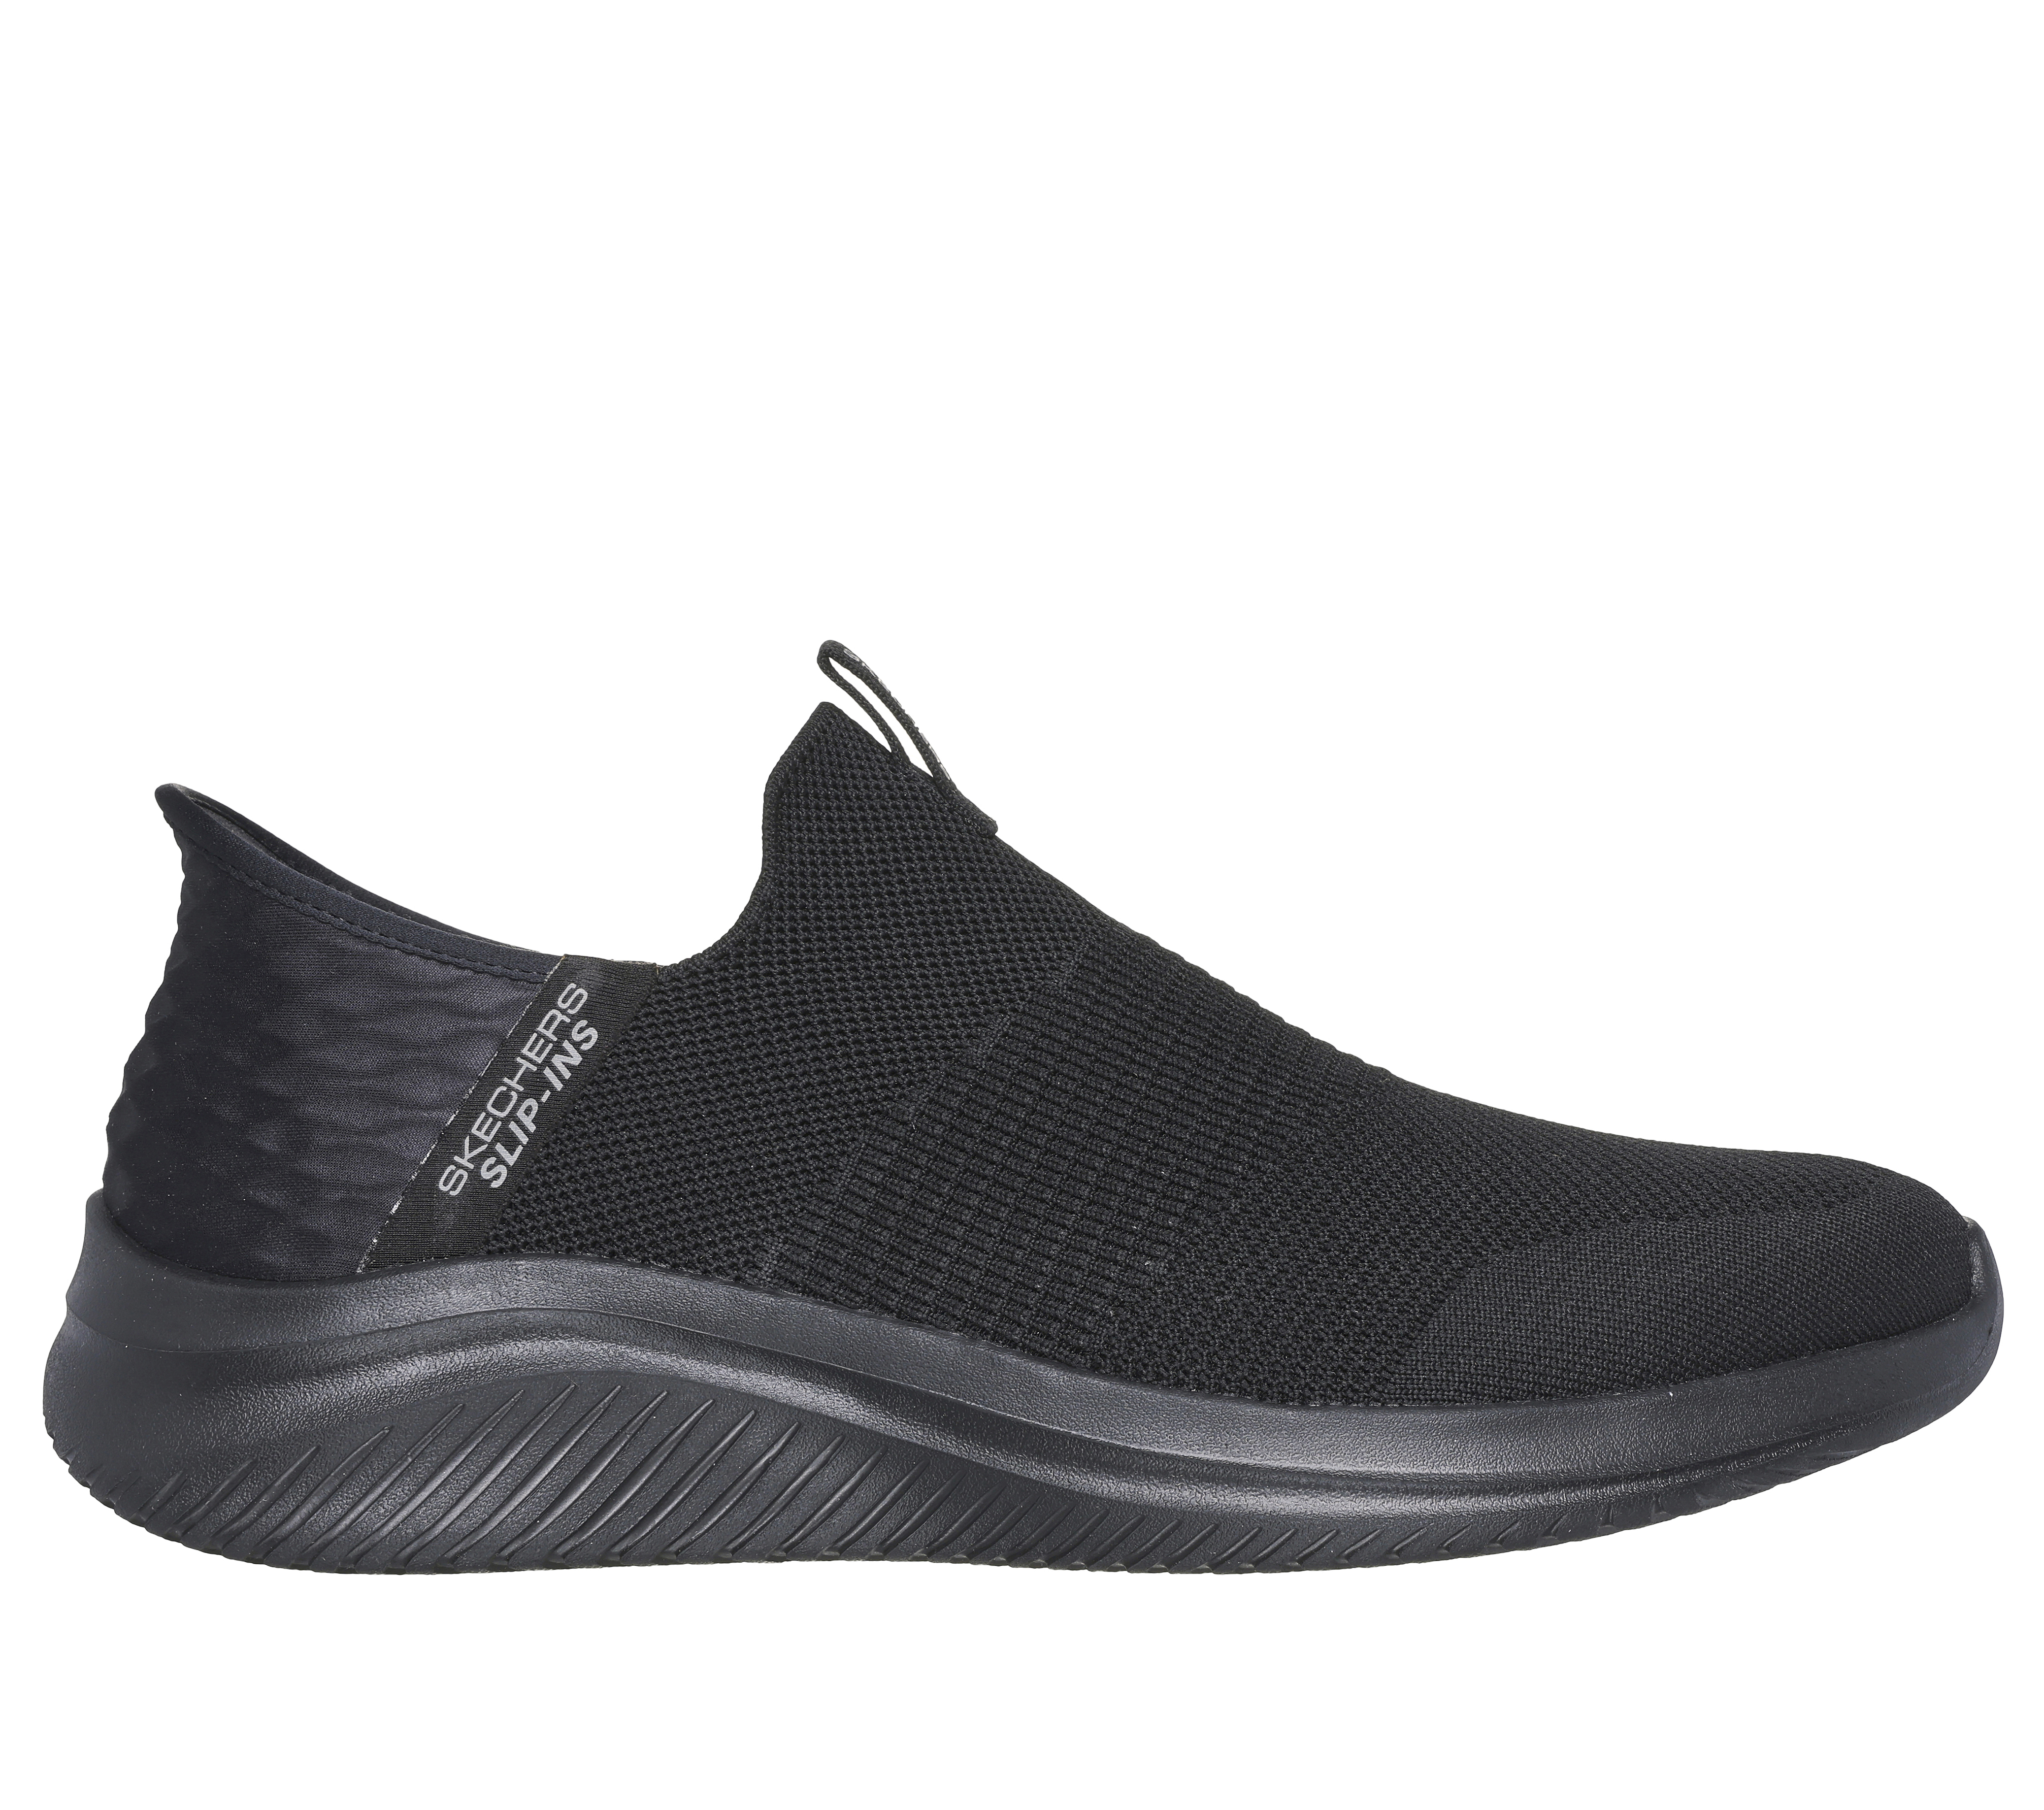 How Much Are the New Skechers Slip-ons?